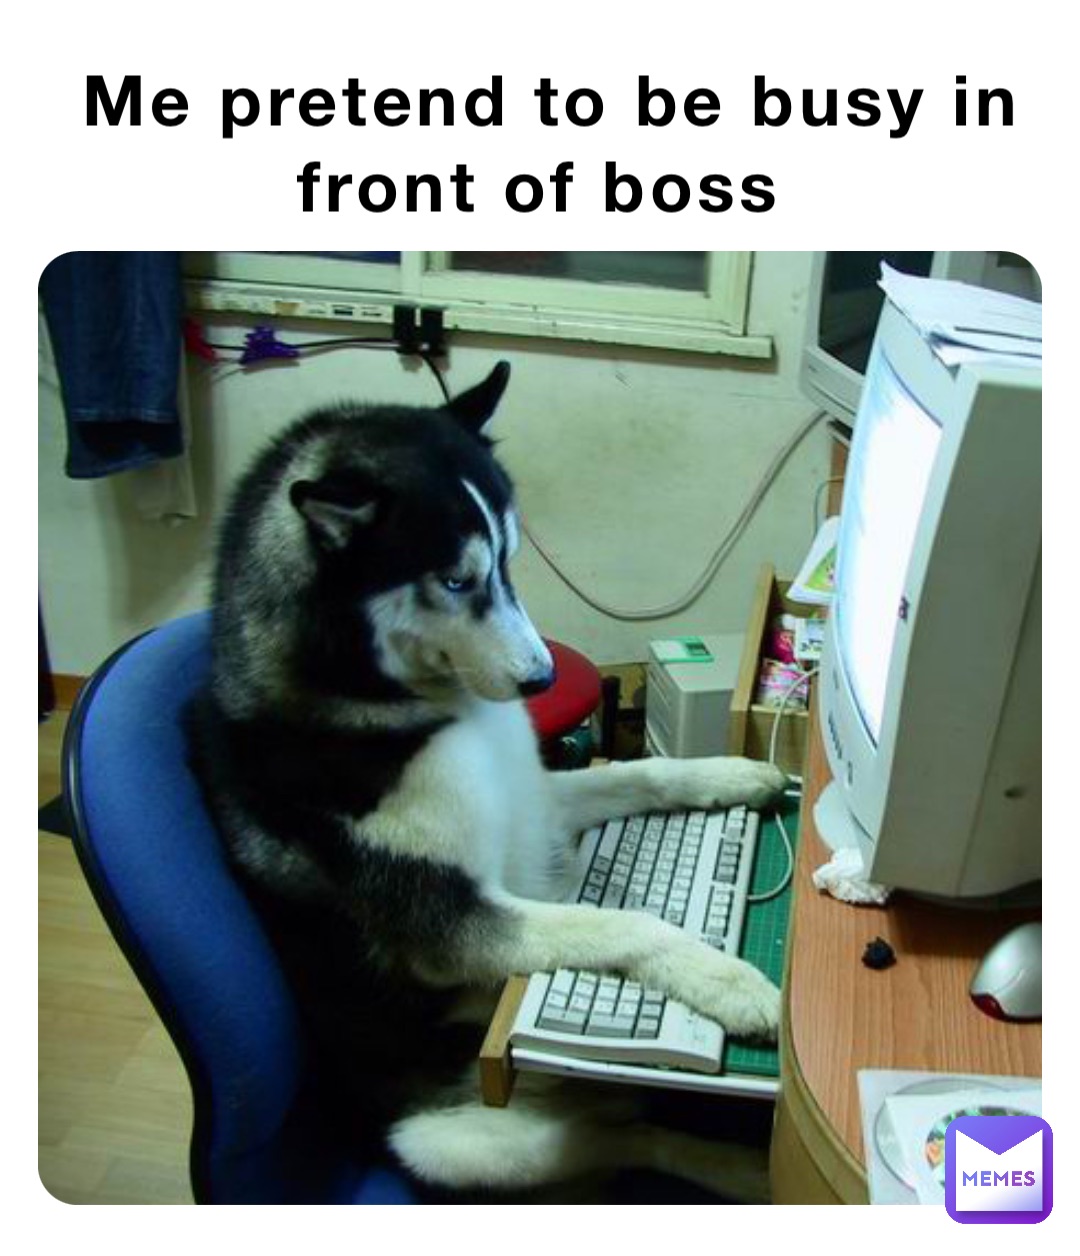 Me pretend to be busy in front of boss